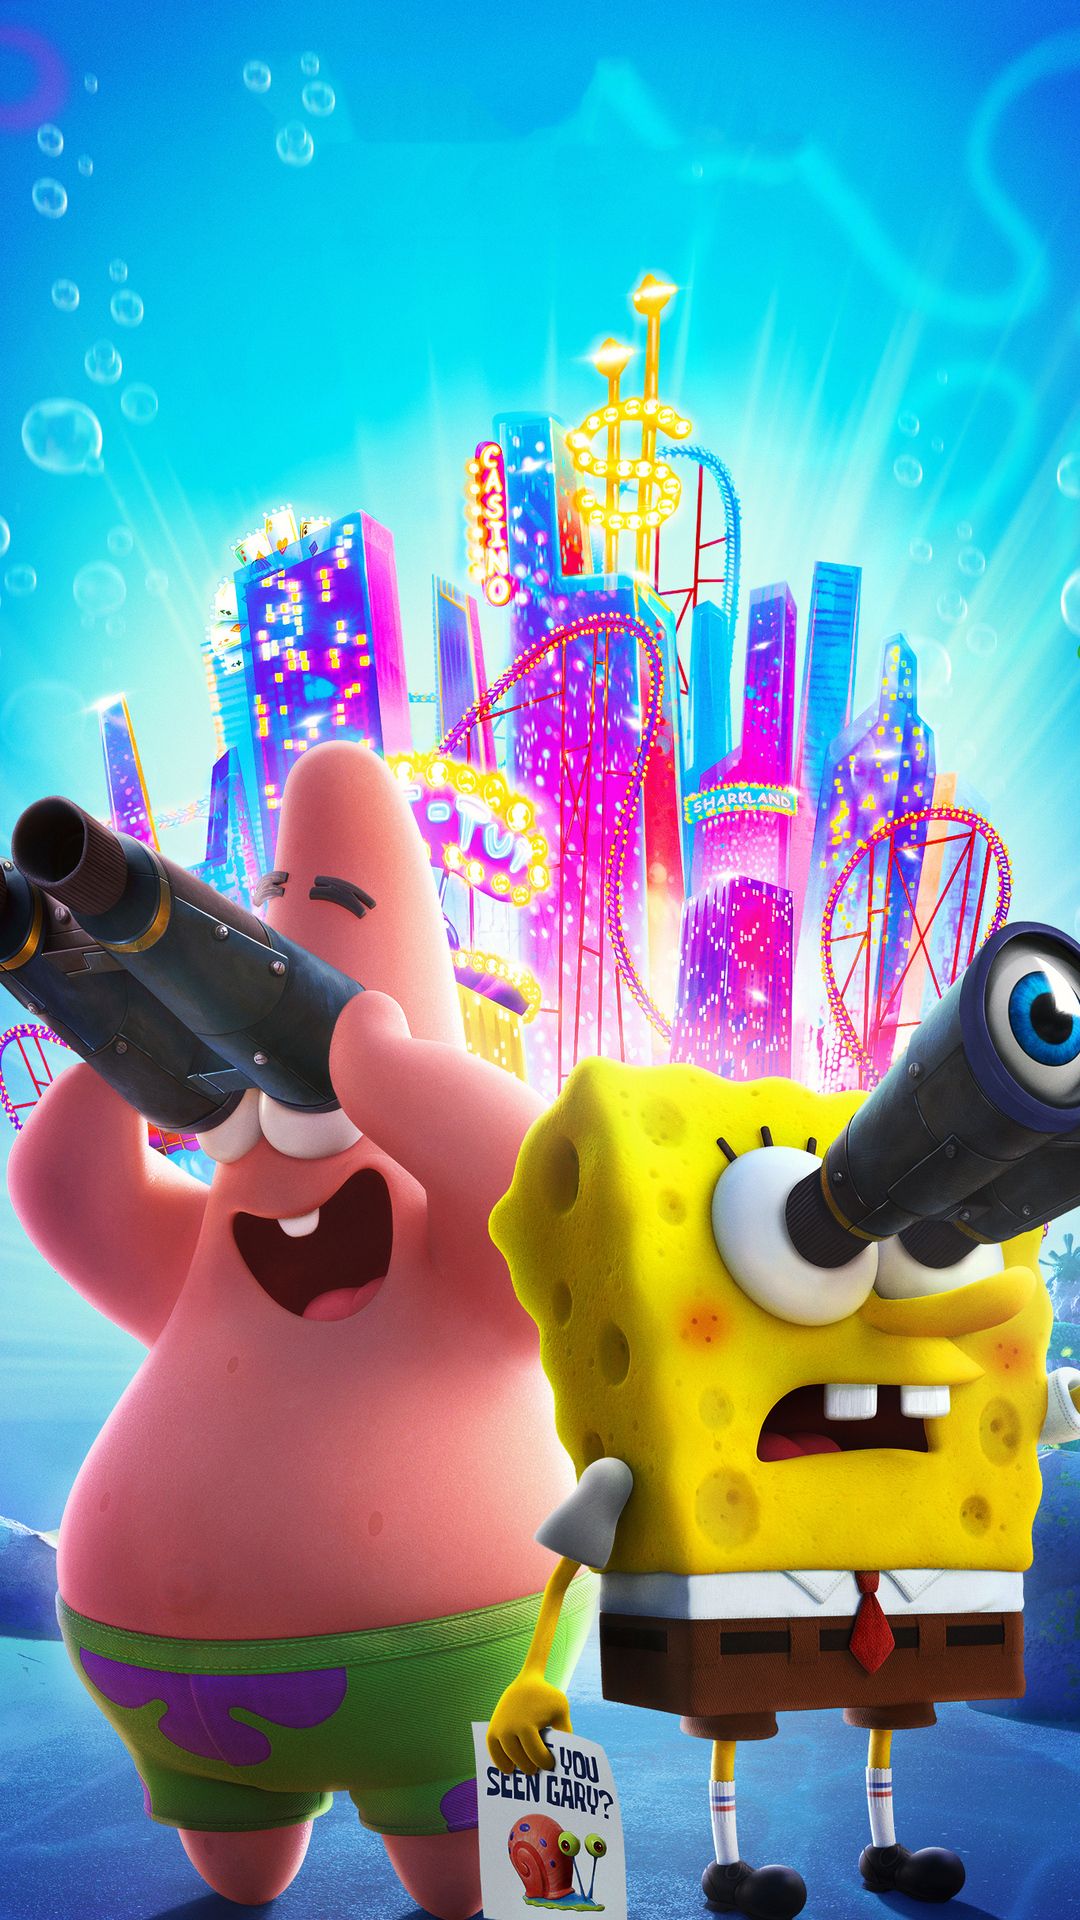 The SpongeBob Movie Sponge On The Run 2020 iPhone 6s, 6 Plus, Pixel xl , One Plus 3t, 5 HD 4k Wallpaper, Image, Background, Photo and Picture